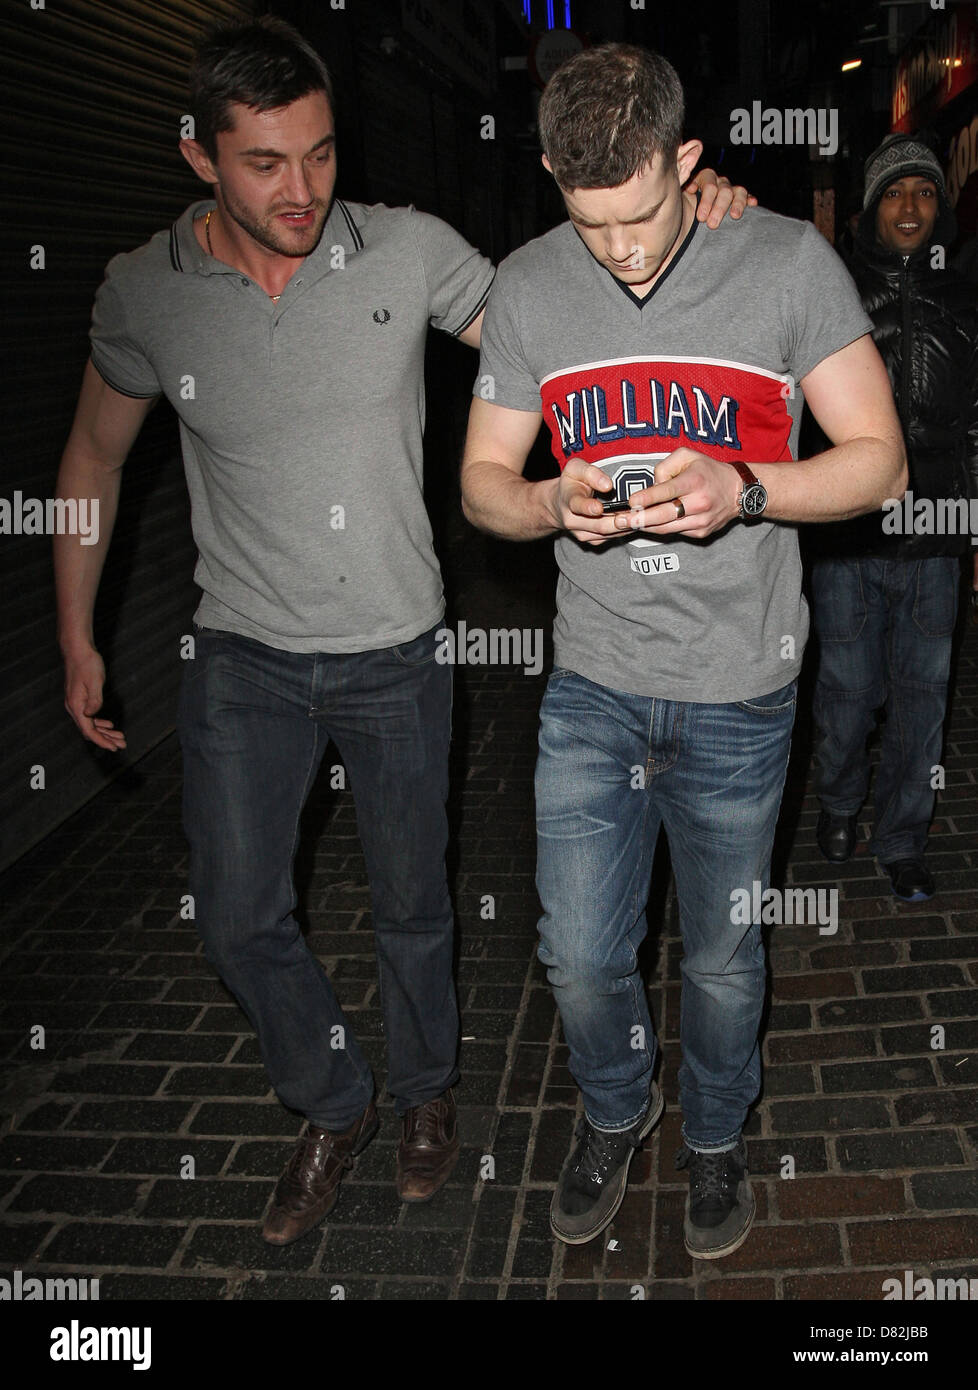 Russell Tovey is thrown out by the bouncers at The Box nightclub in Soho. London, England - 17.02.12 Stock Photo